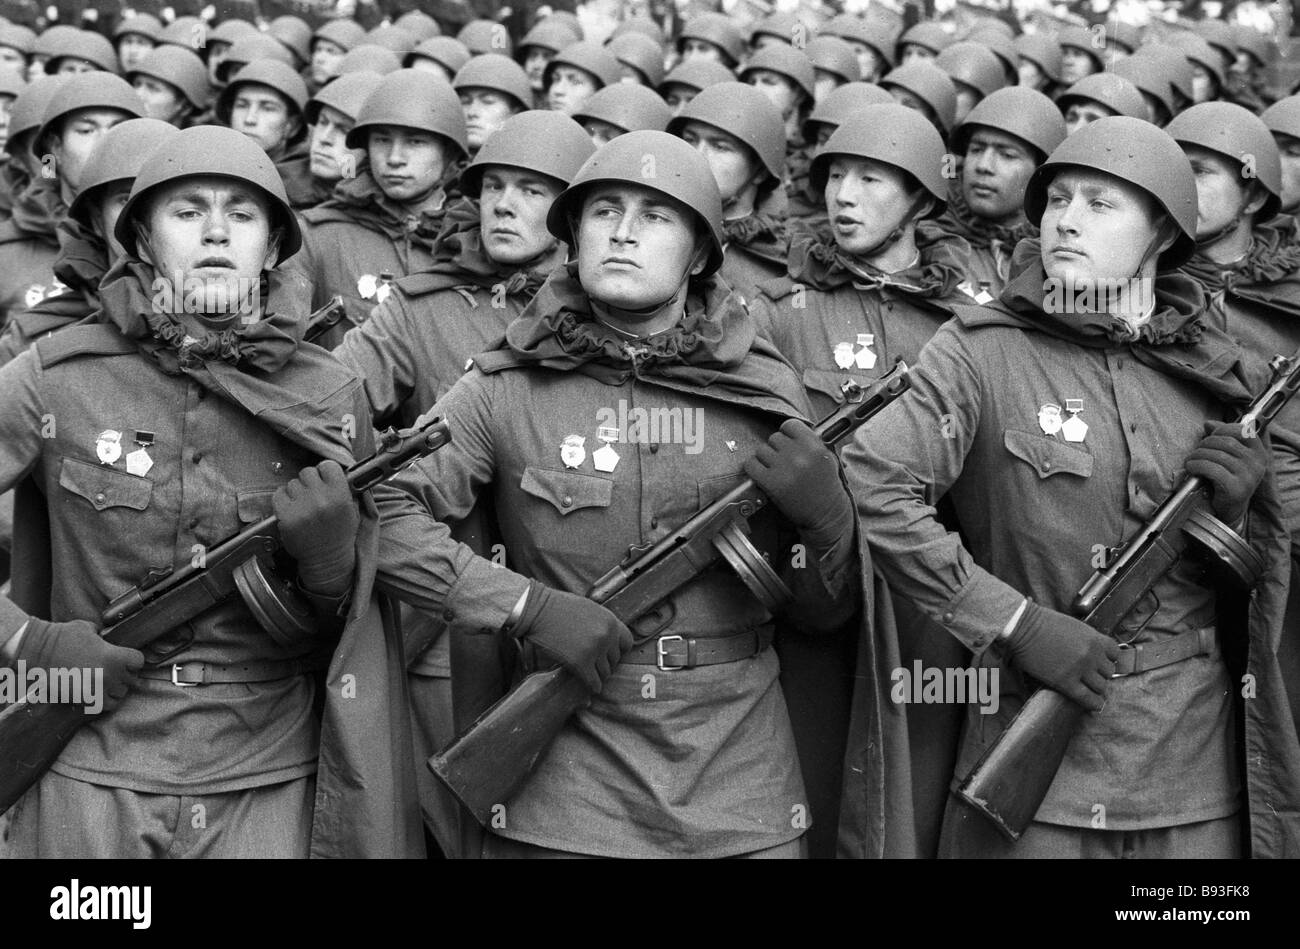 soviet-soldiers-in-wwii-uniform-parade-in-the-red-square-on-the-occasion-B93FK8.jpg